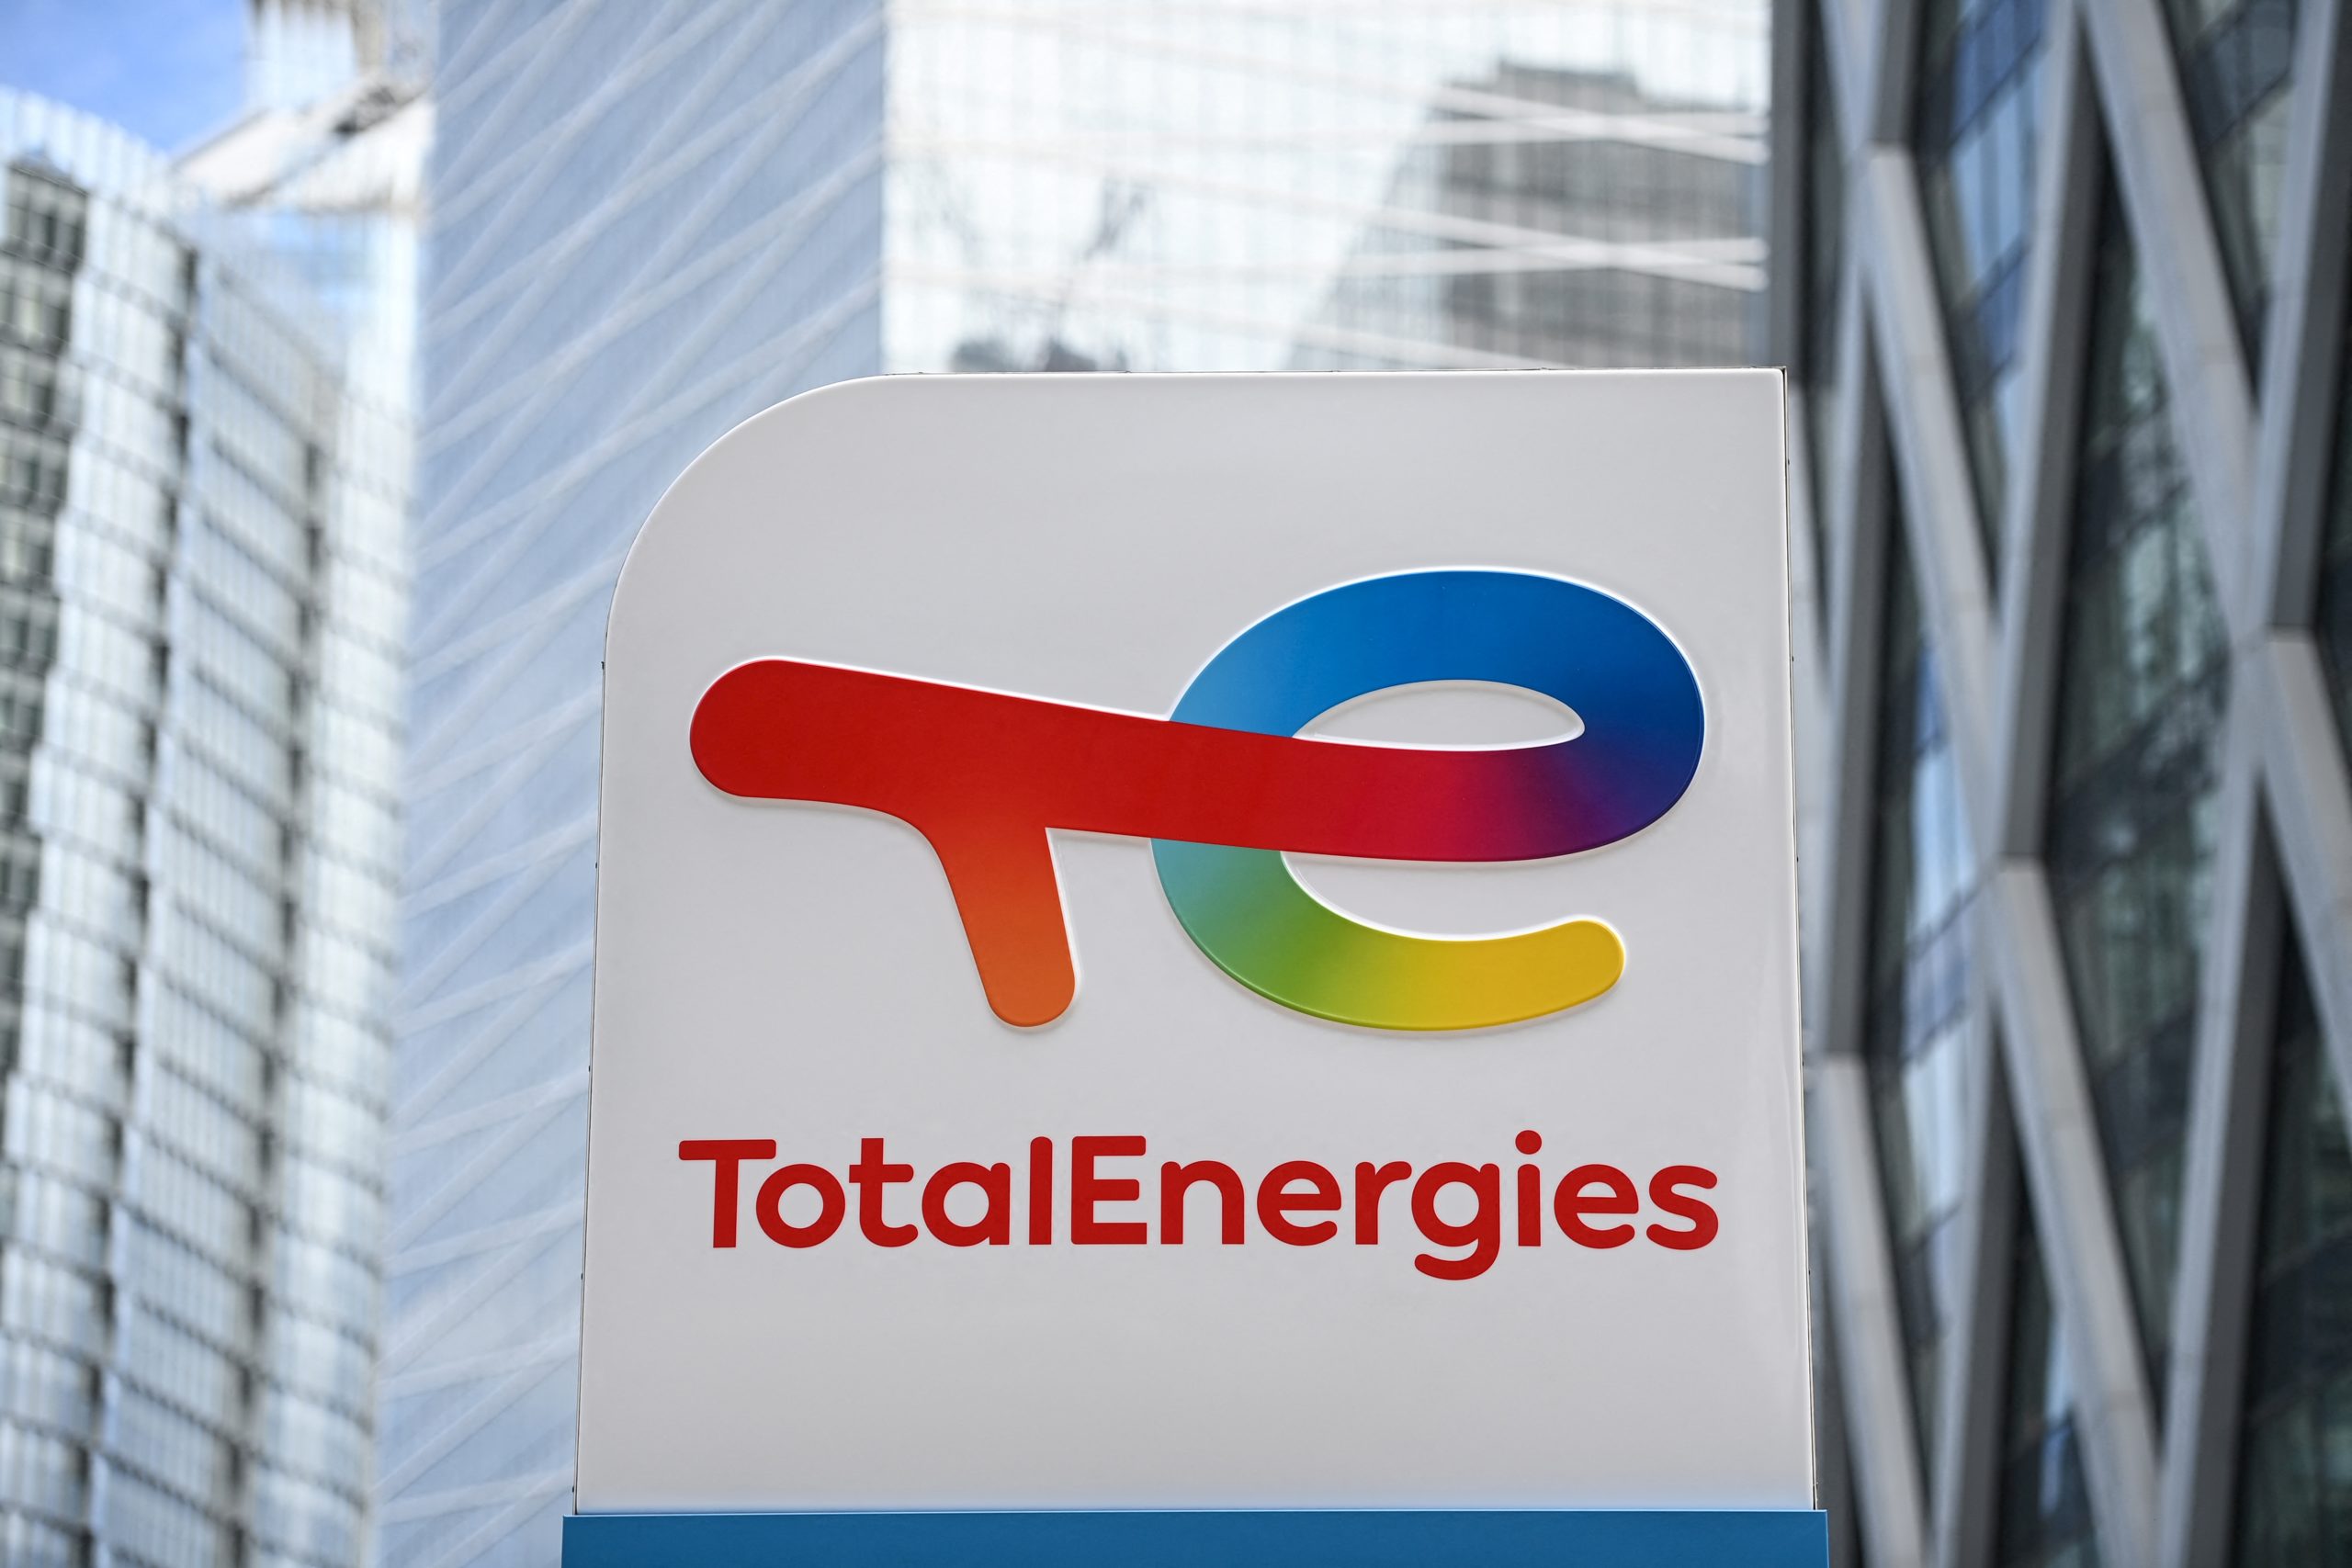 TotalEnergies to install 11 000 fast-charging stations in China